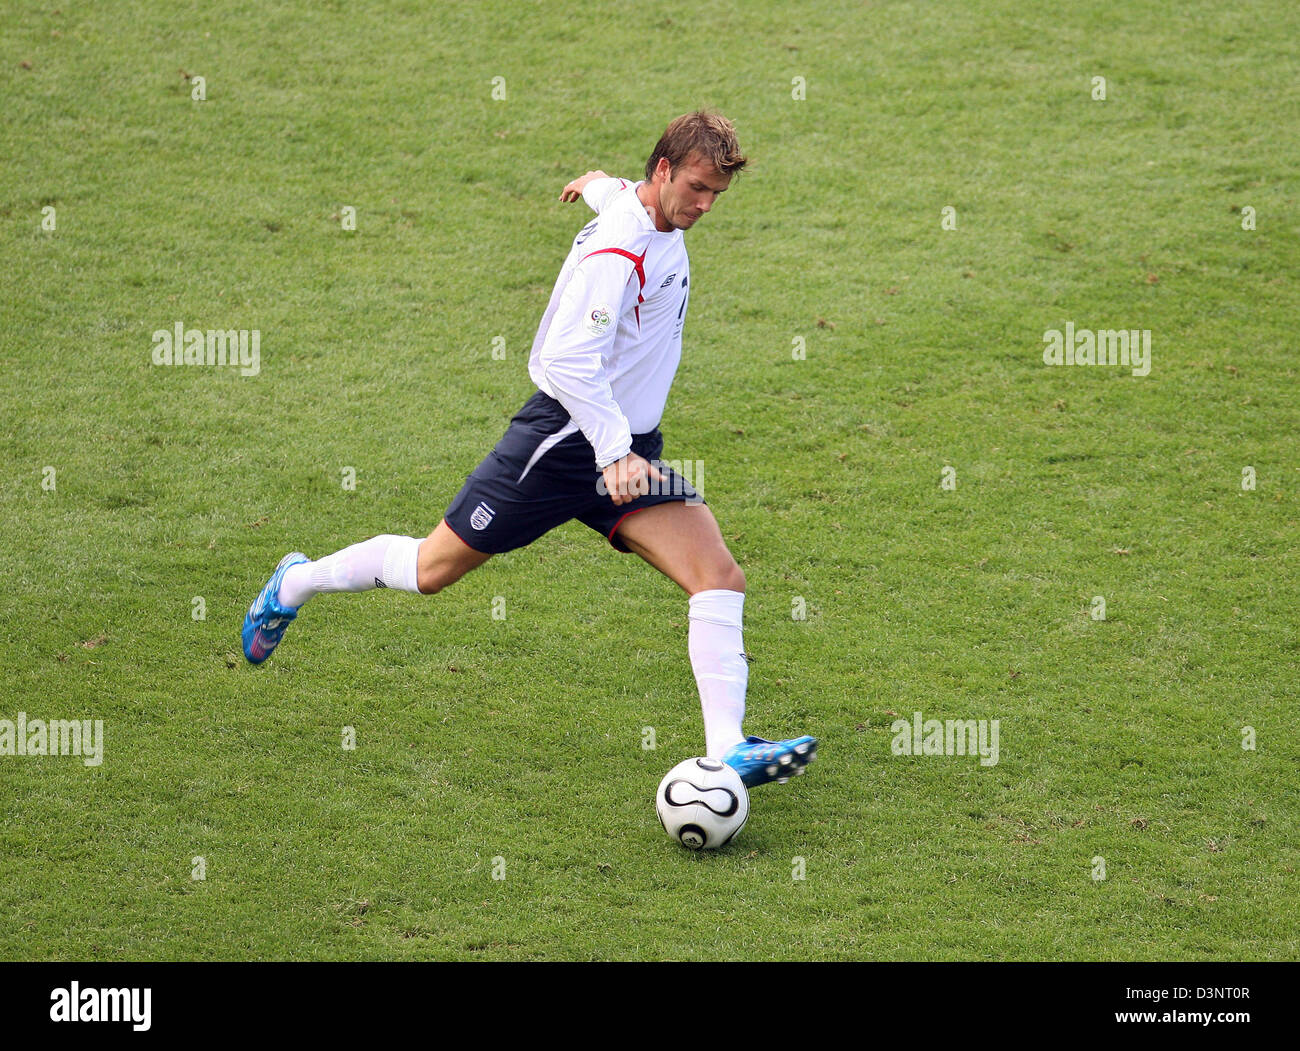 England's national soccer star David Beckham kicks the ball during the FIFA World Cup 2006 second round tie with Ecuador in Stuttgart, Germany, Sunday, 25 June 2006. England advanced to the quarter finals with a 1-0 triumph. Photo: Uli Deck dpa +++ Mobile Services OUT +++ Please refer to FIFA's terms and conditions Stock Photo